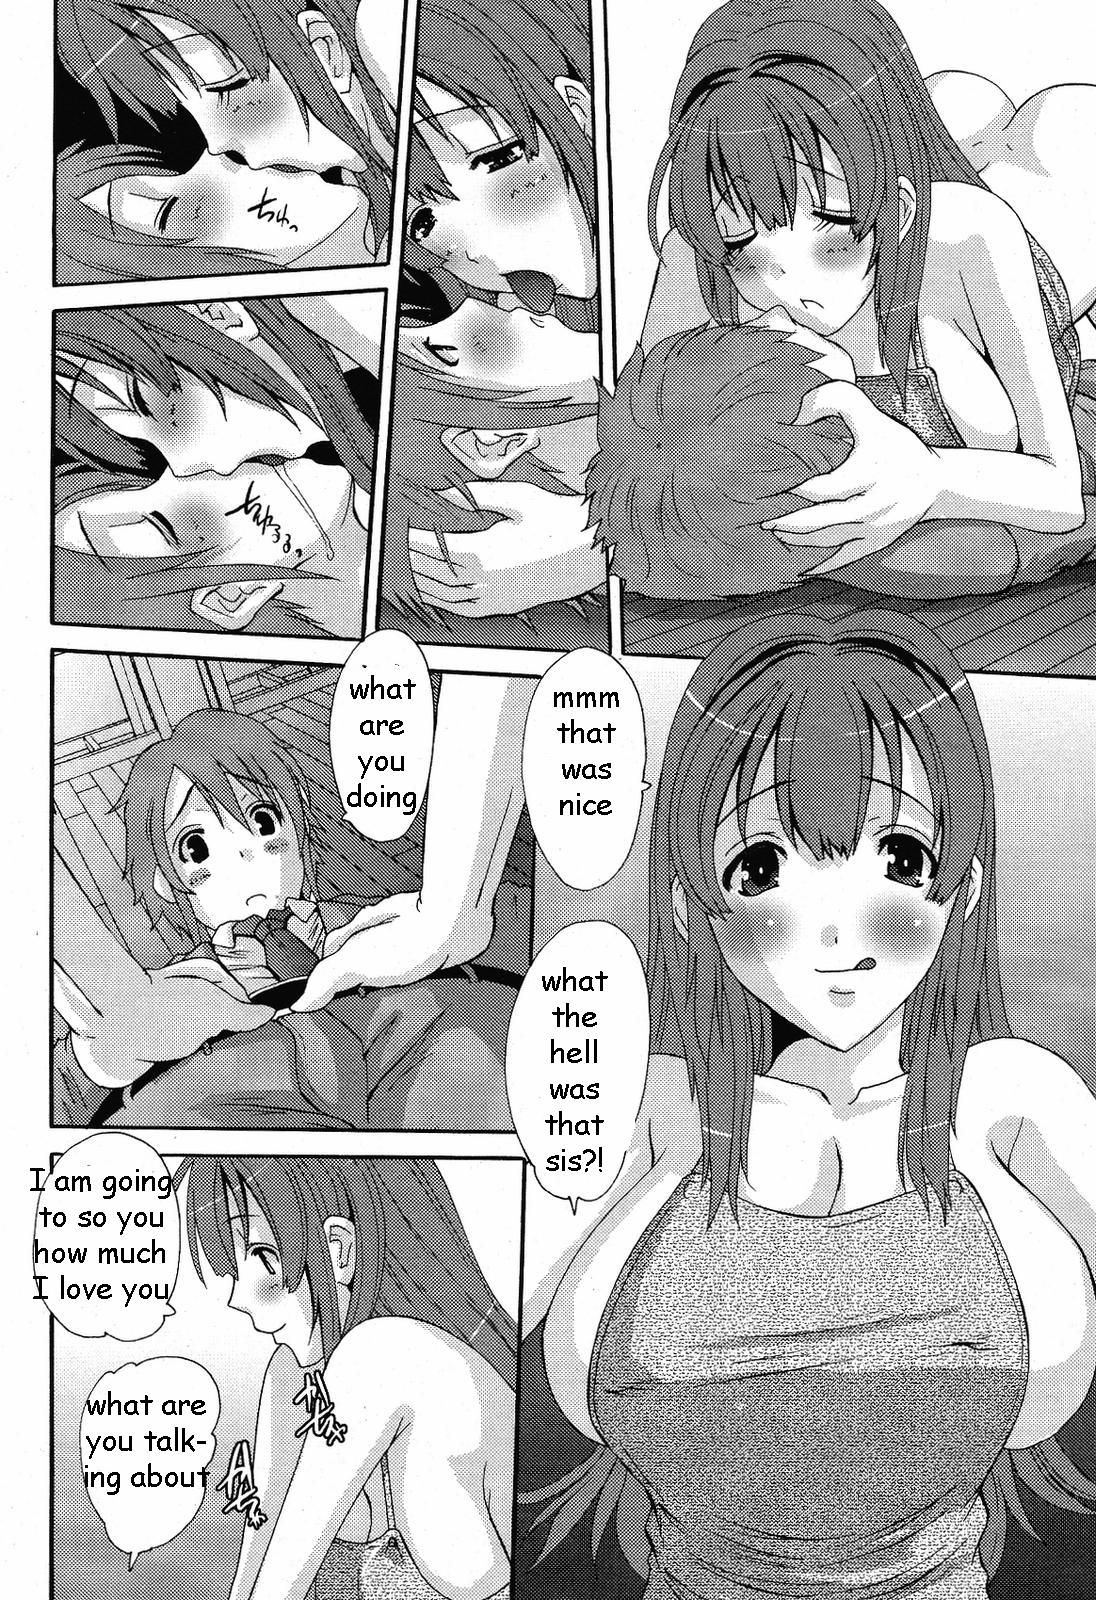 Moaning Sister's Apron Love Harcore - Page 4